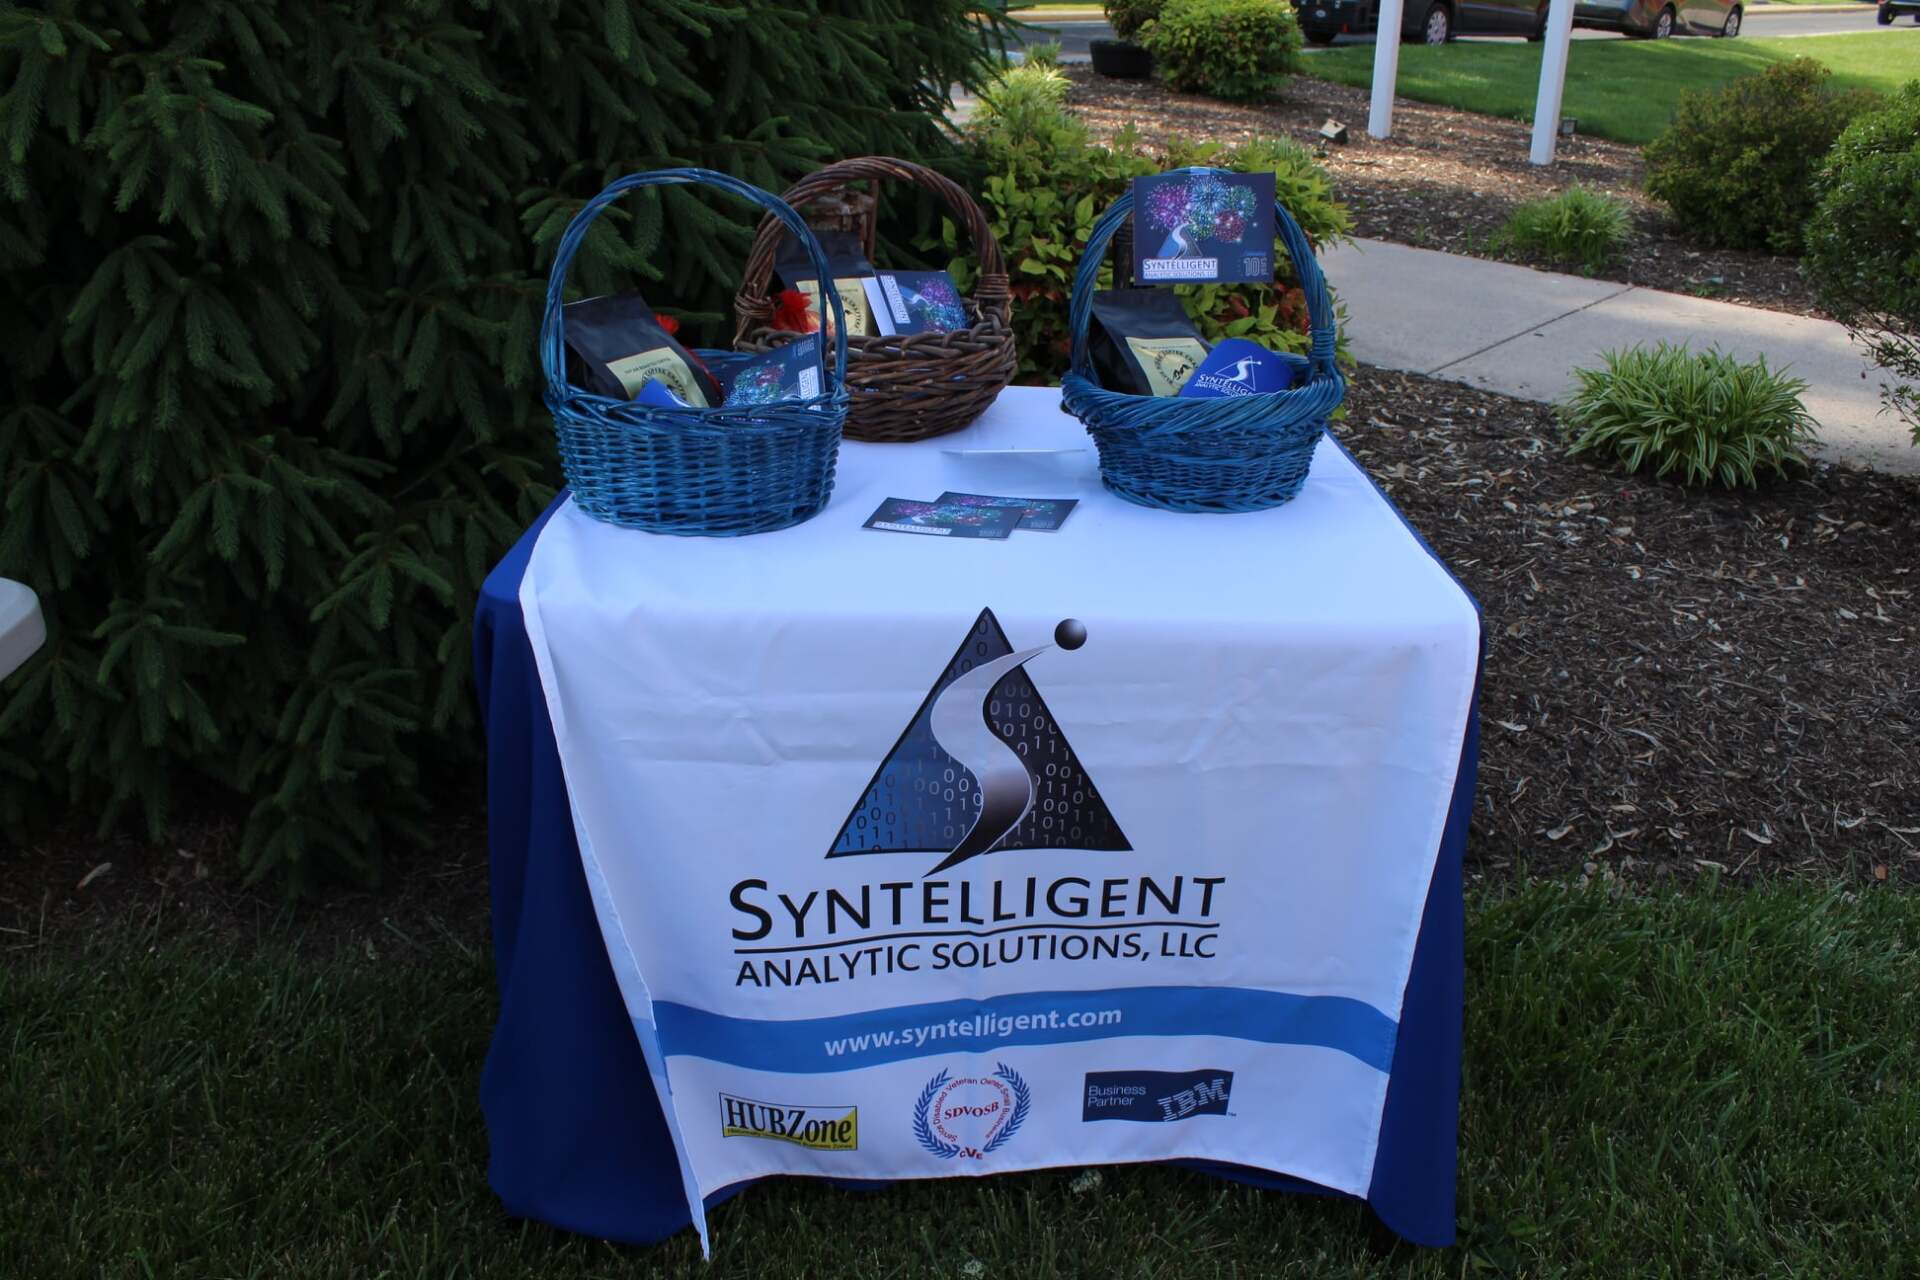 image of gift baskets given away at the event